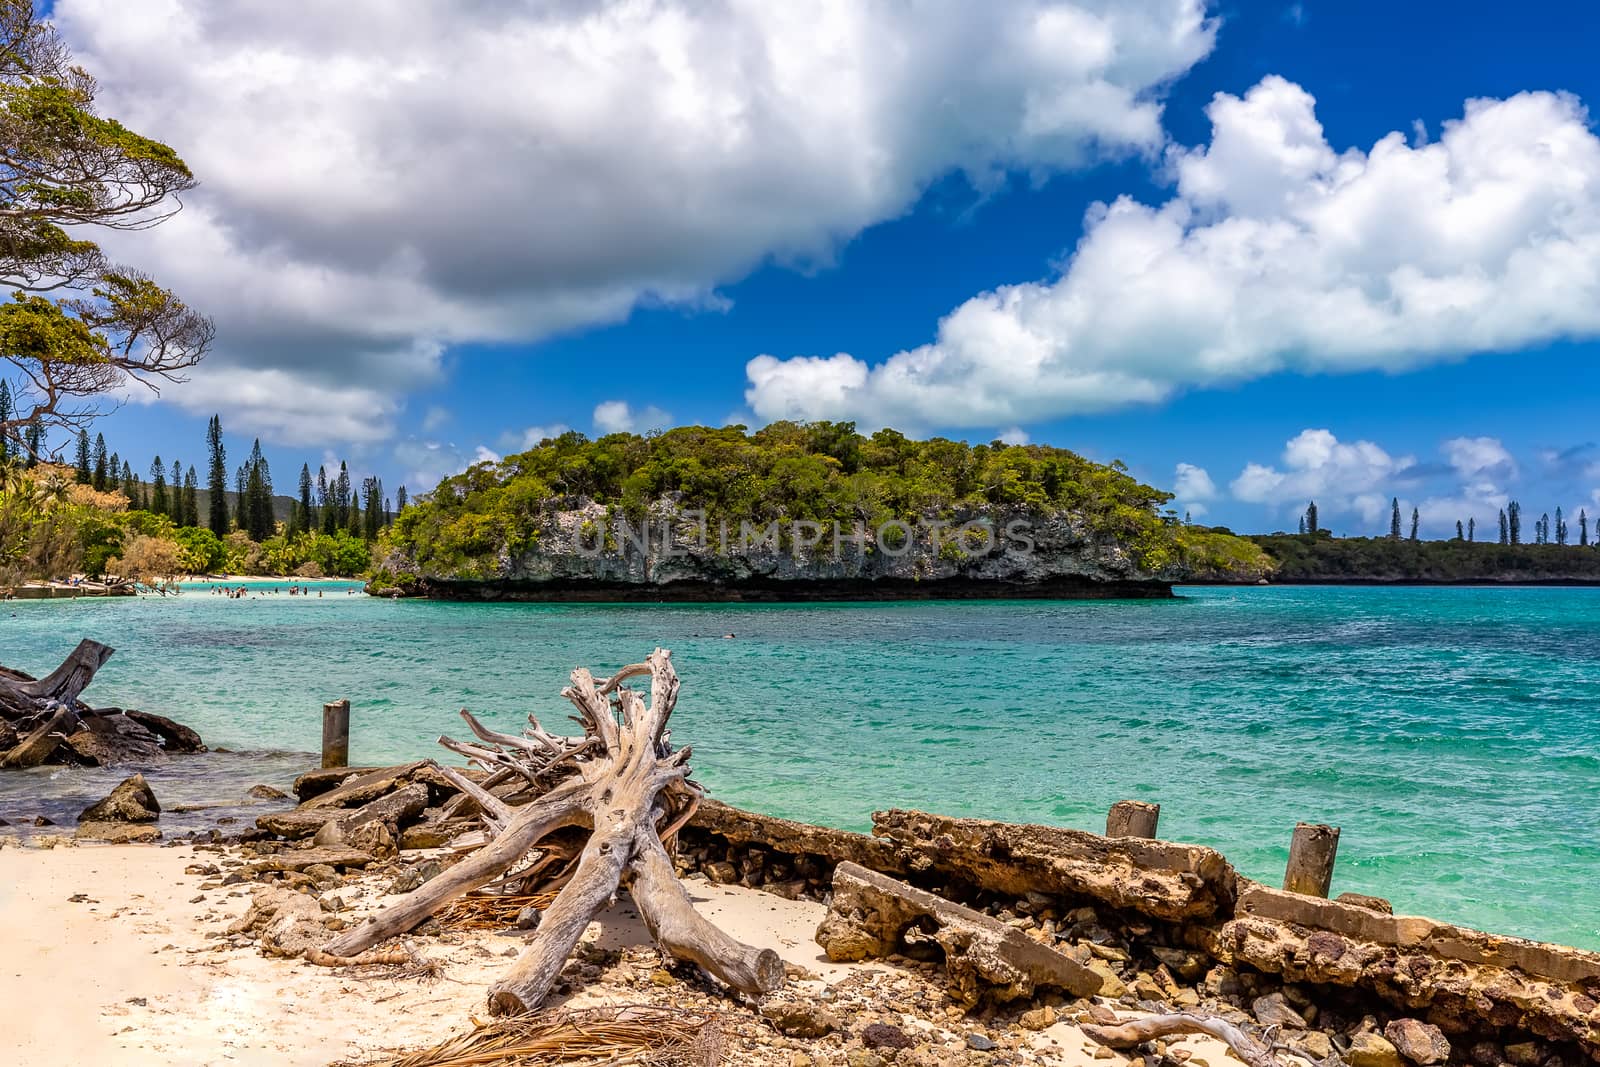 View of a tropical sandy shoreline with a massive rocky island, blue sky and clouds in the background.